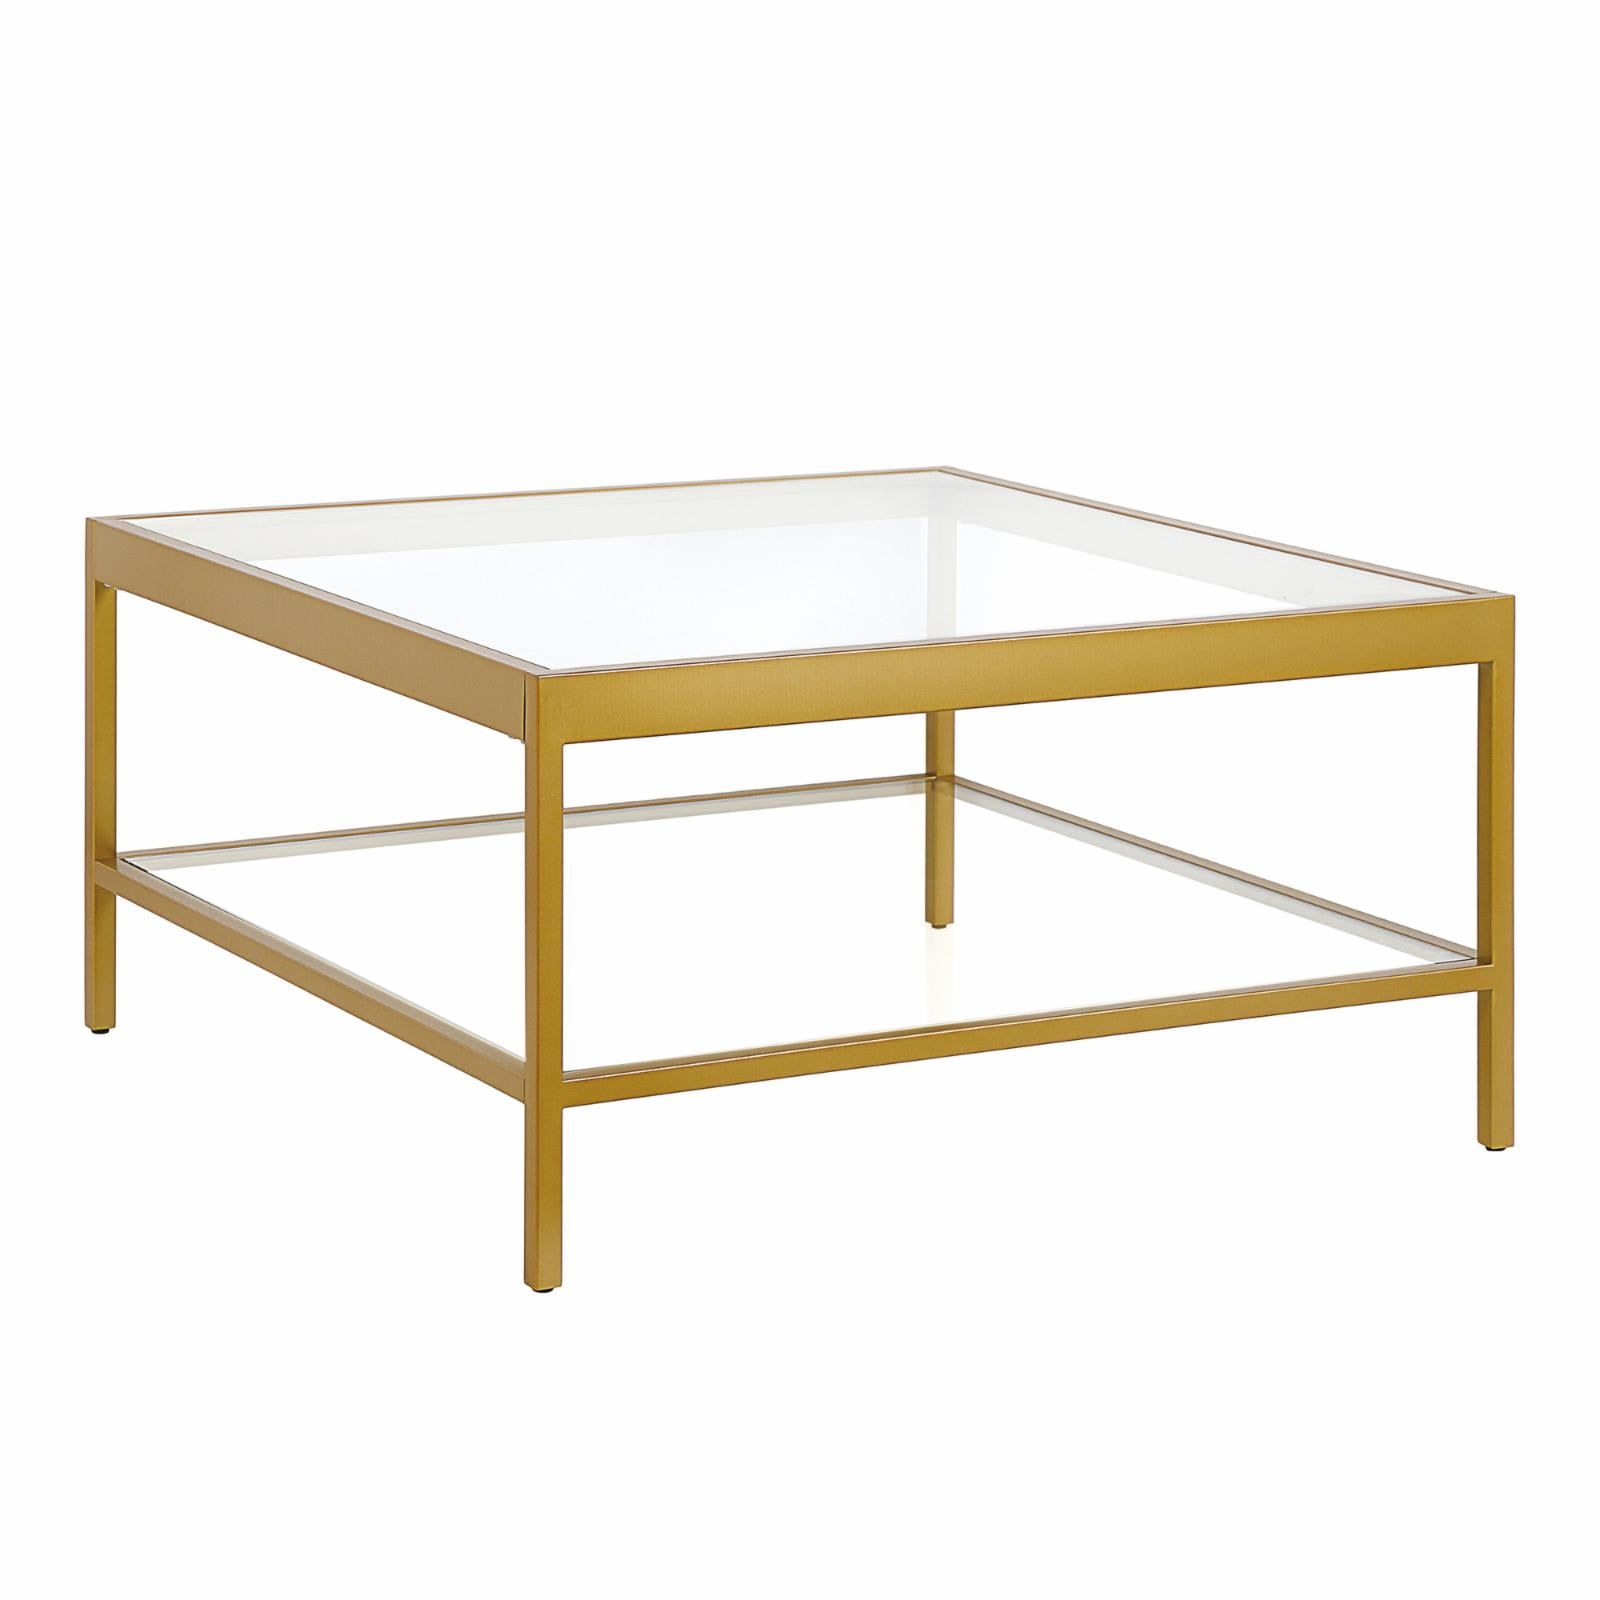 Addison&lane Alexis Square Coffee Table – Walmart Within Addison&amp;lane Calix Square Tables (View 7 of 15)